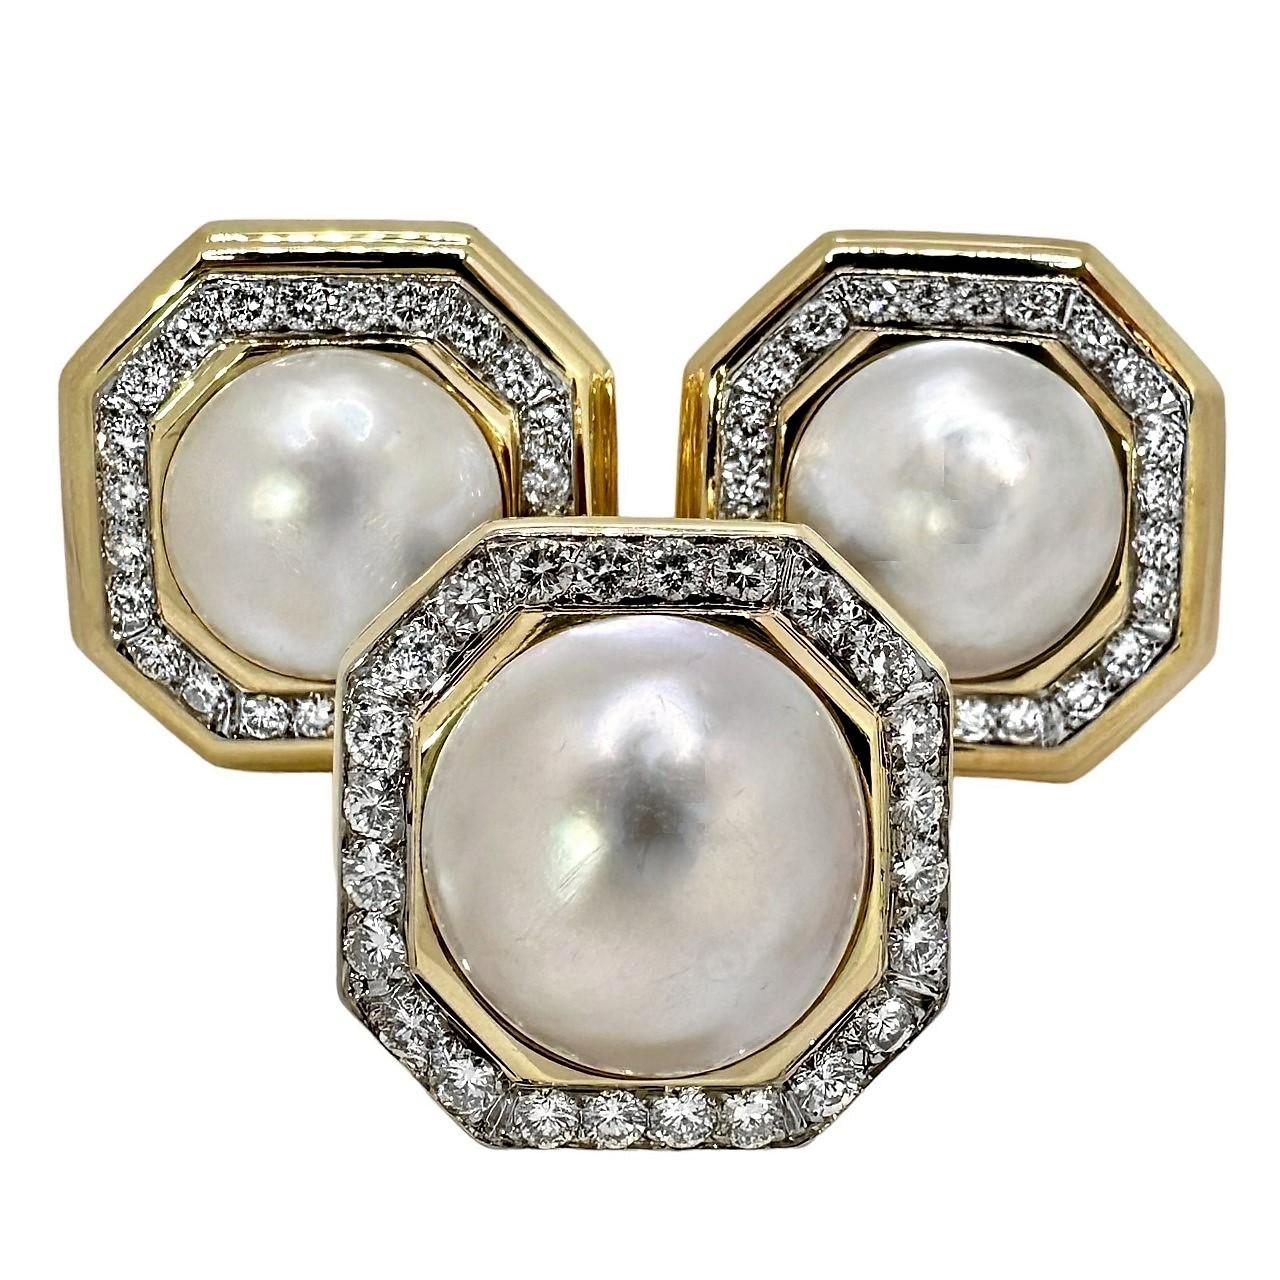 Grand Scale Earrings in Gold, Platinum, Mabe Pearl, & Diamonds by Wander, France For Sale 3